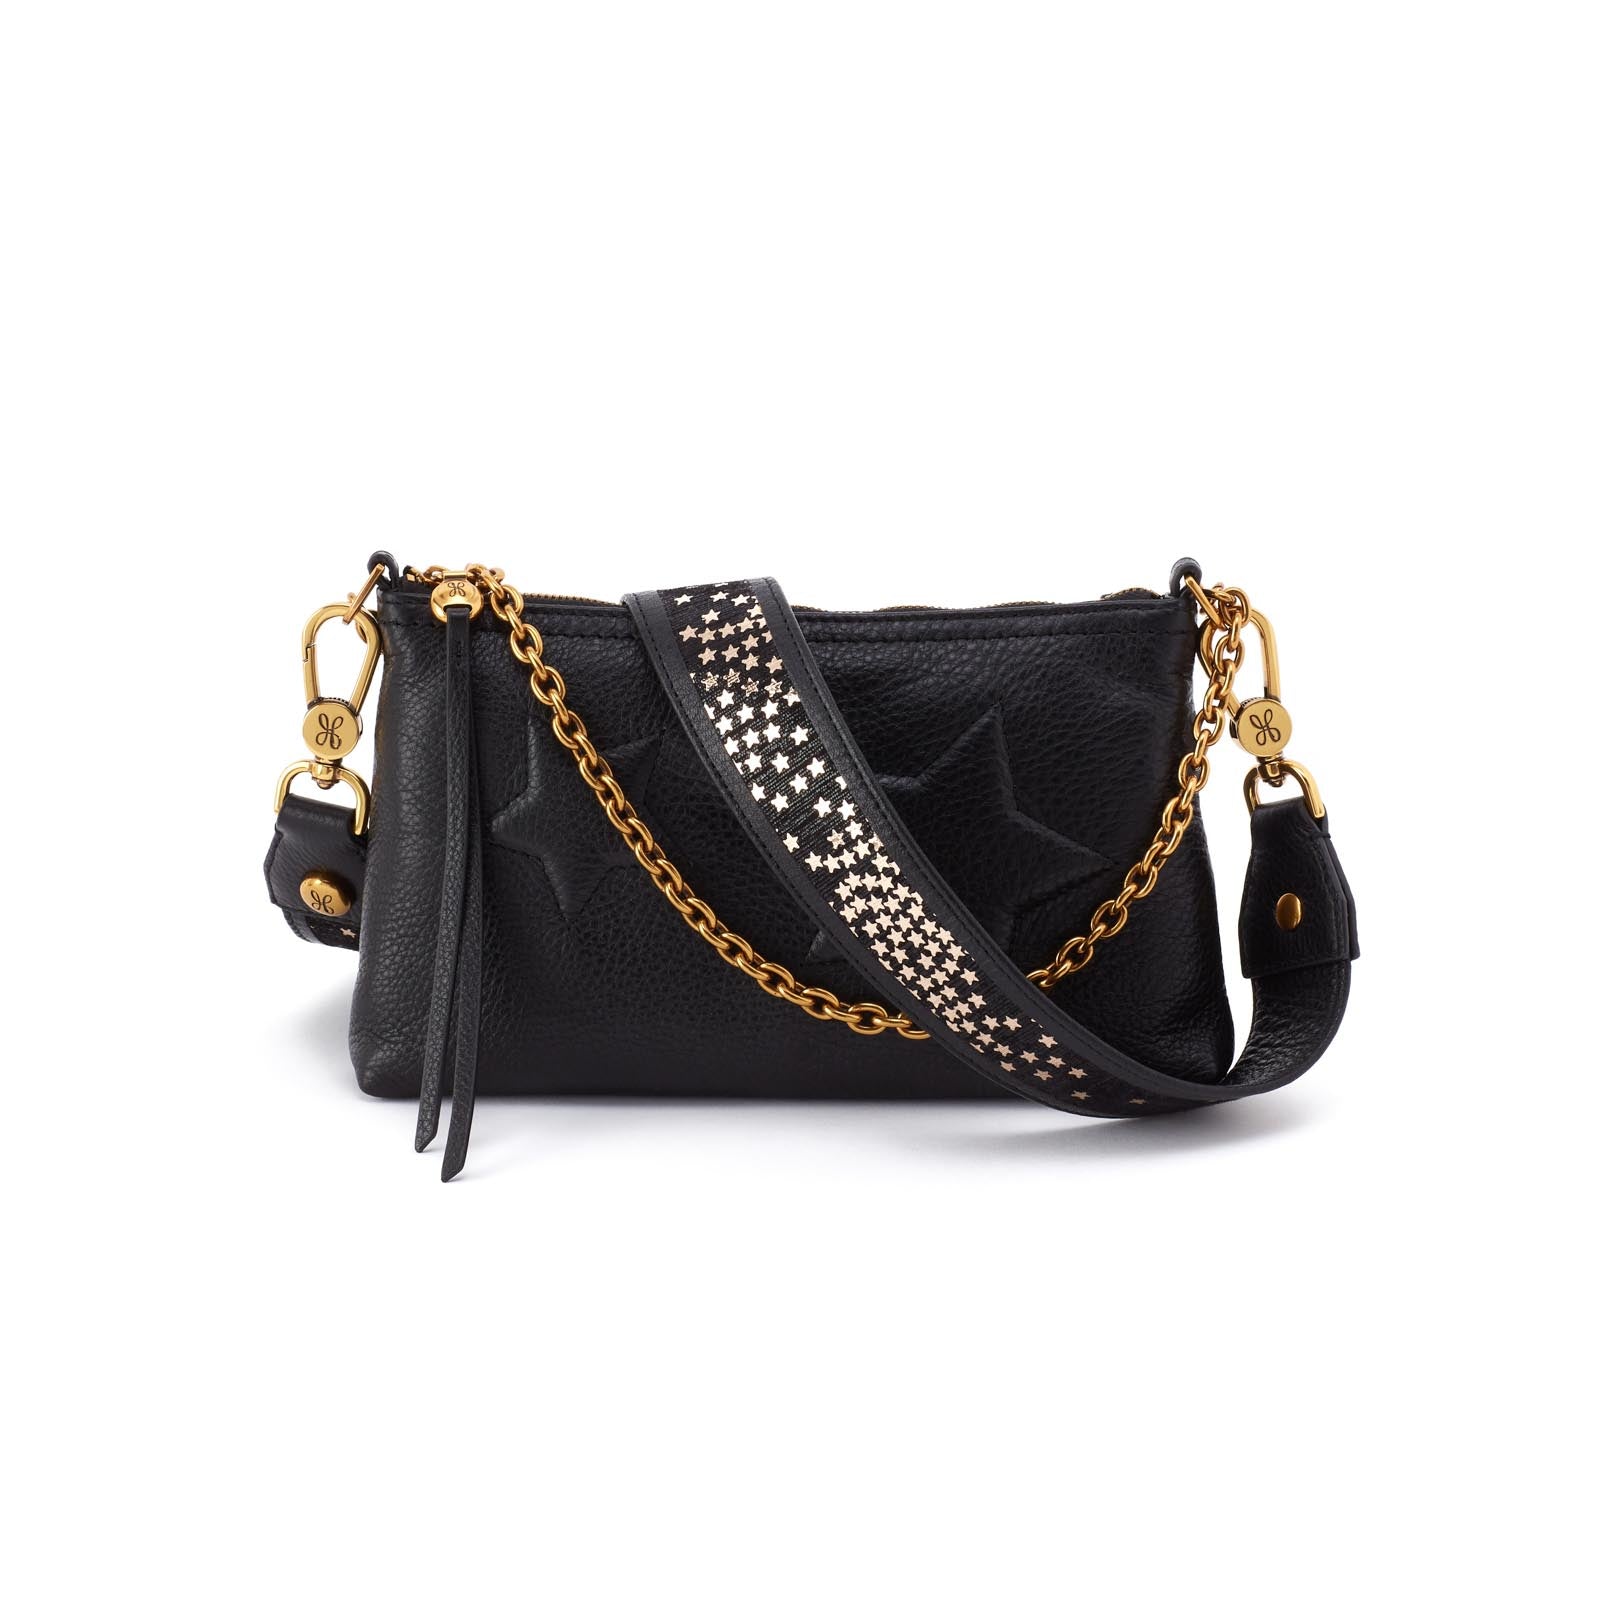 Hobo Darcy Luxe Crossbody, Black with Bombe Stars - Statement Boutique